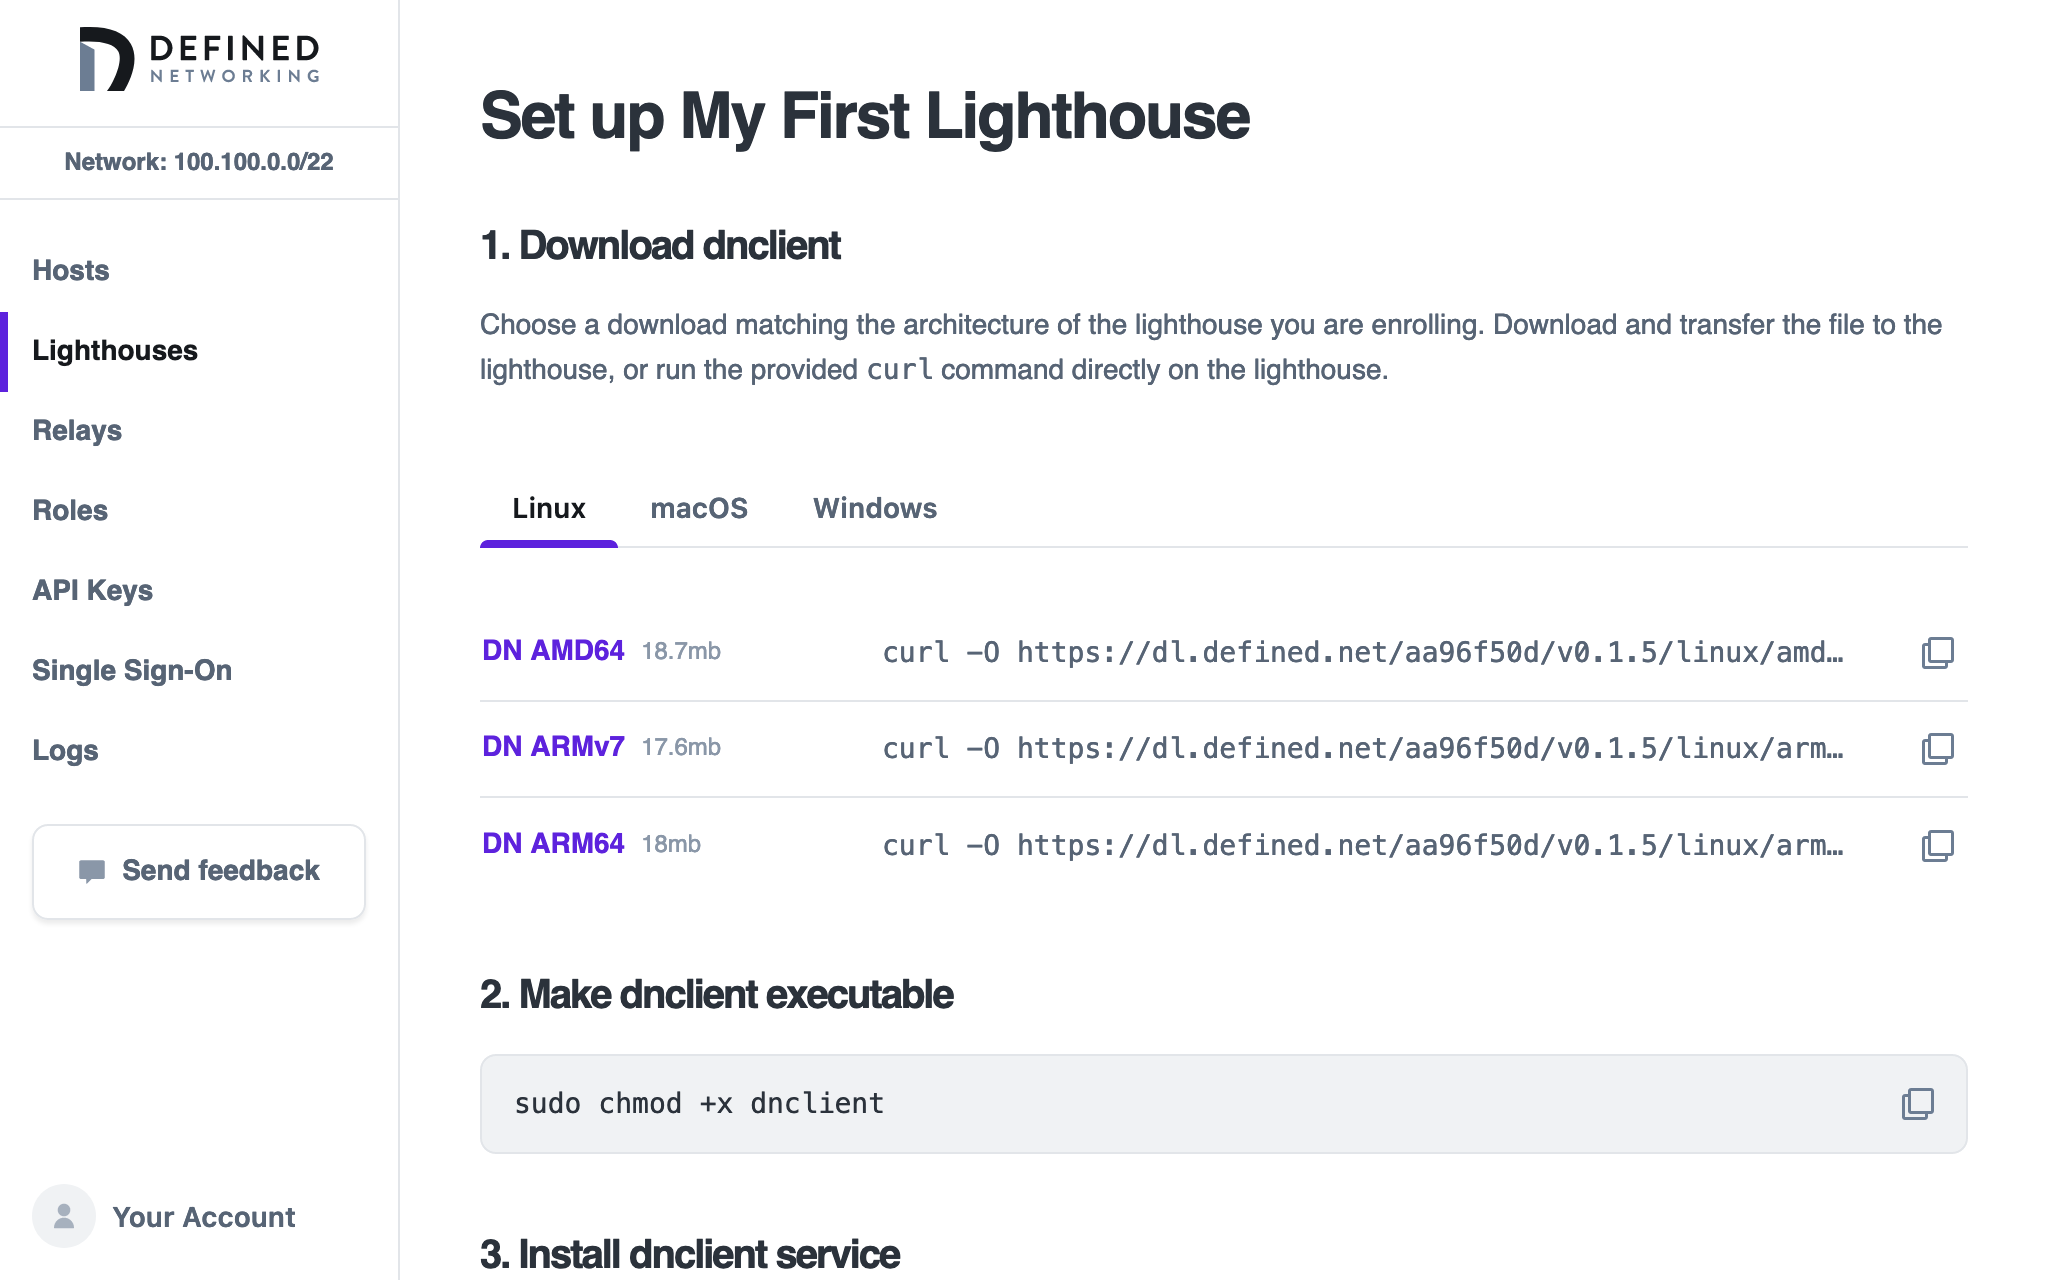 Enroll page for a new lighthouse named 'My First Lighthouse'. It shows 3 steps, with more pas the edge of the screen: Download dnclient, Make dnclient executable, Install dnclient service.